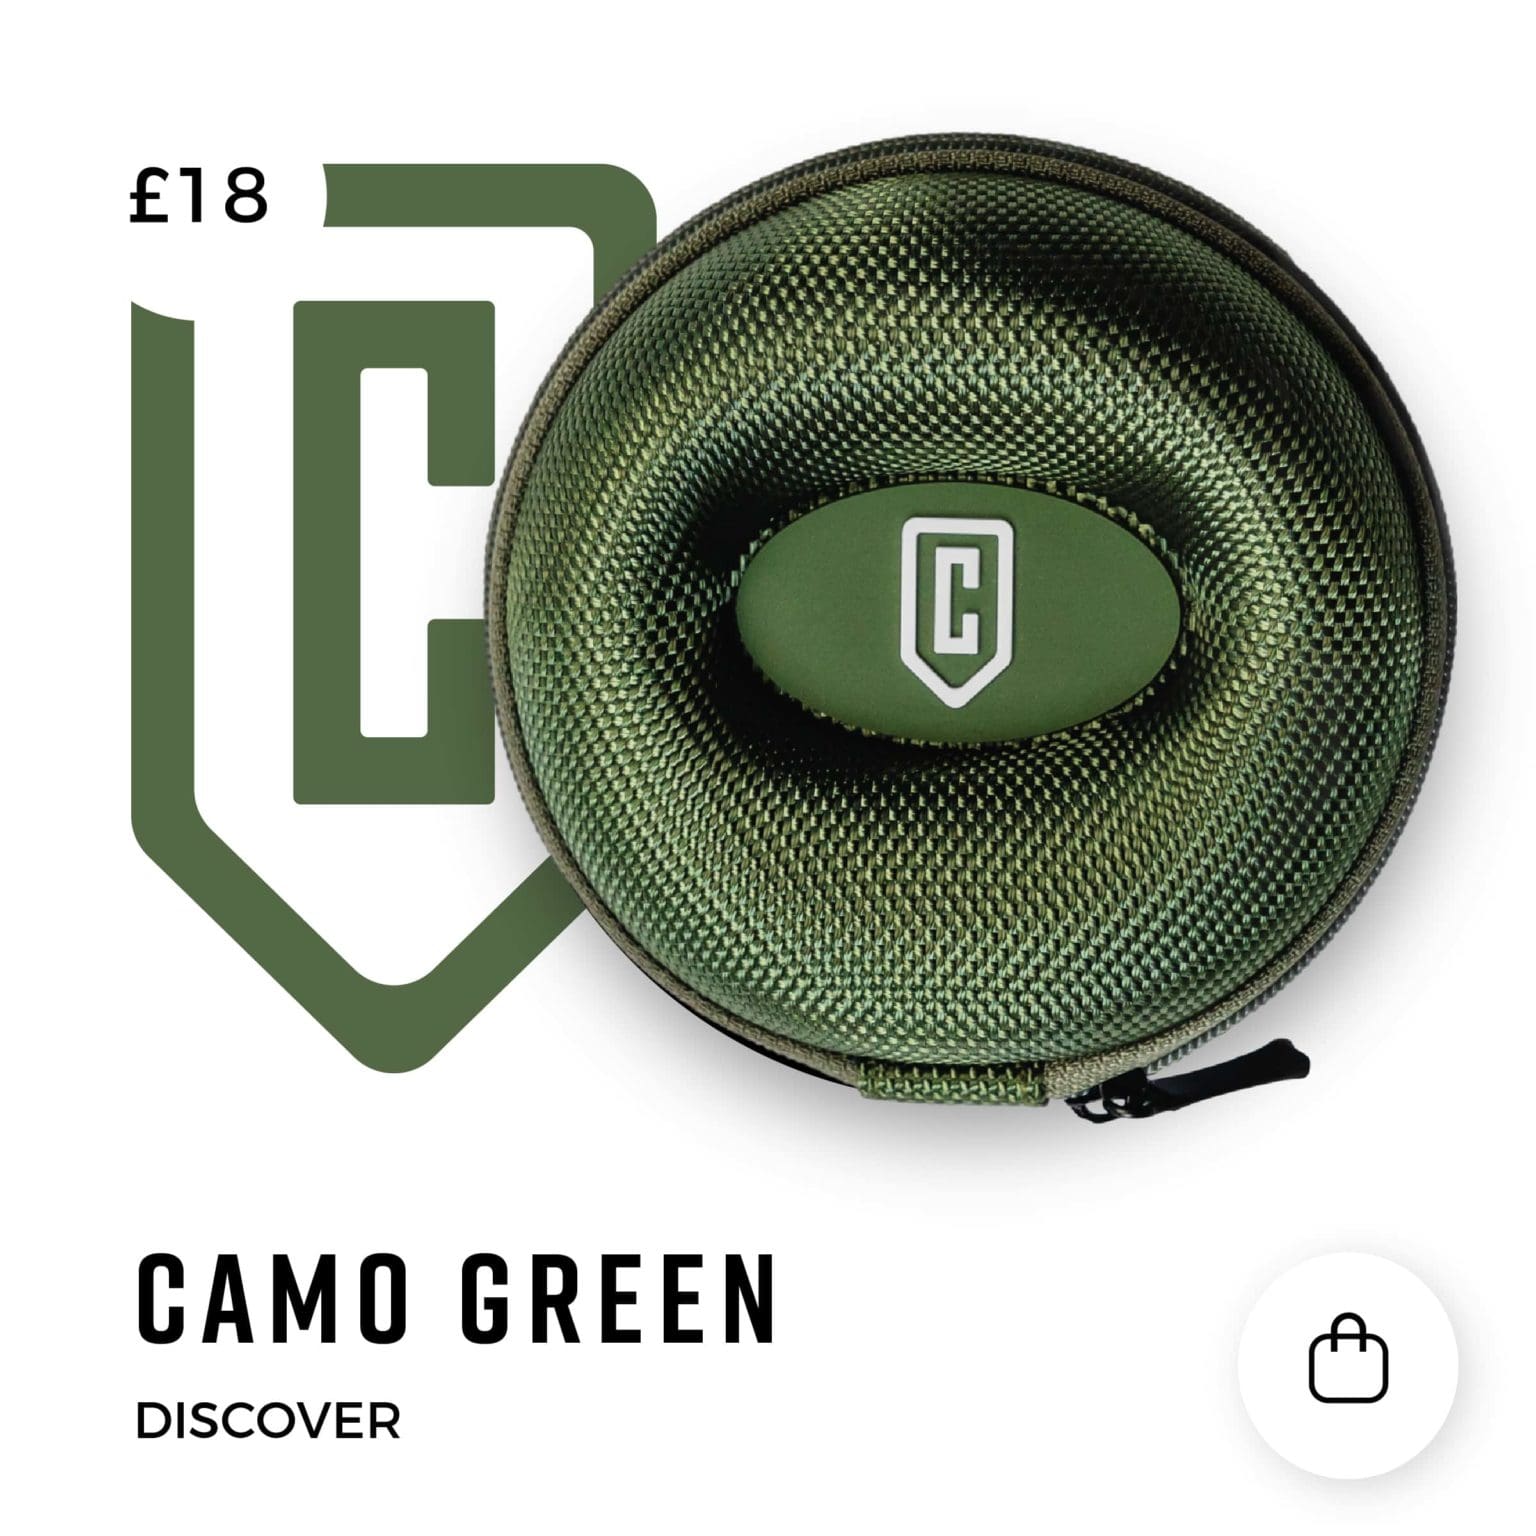 Cased In Time Camo Green watch protector website graphic